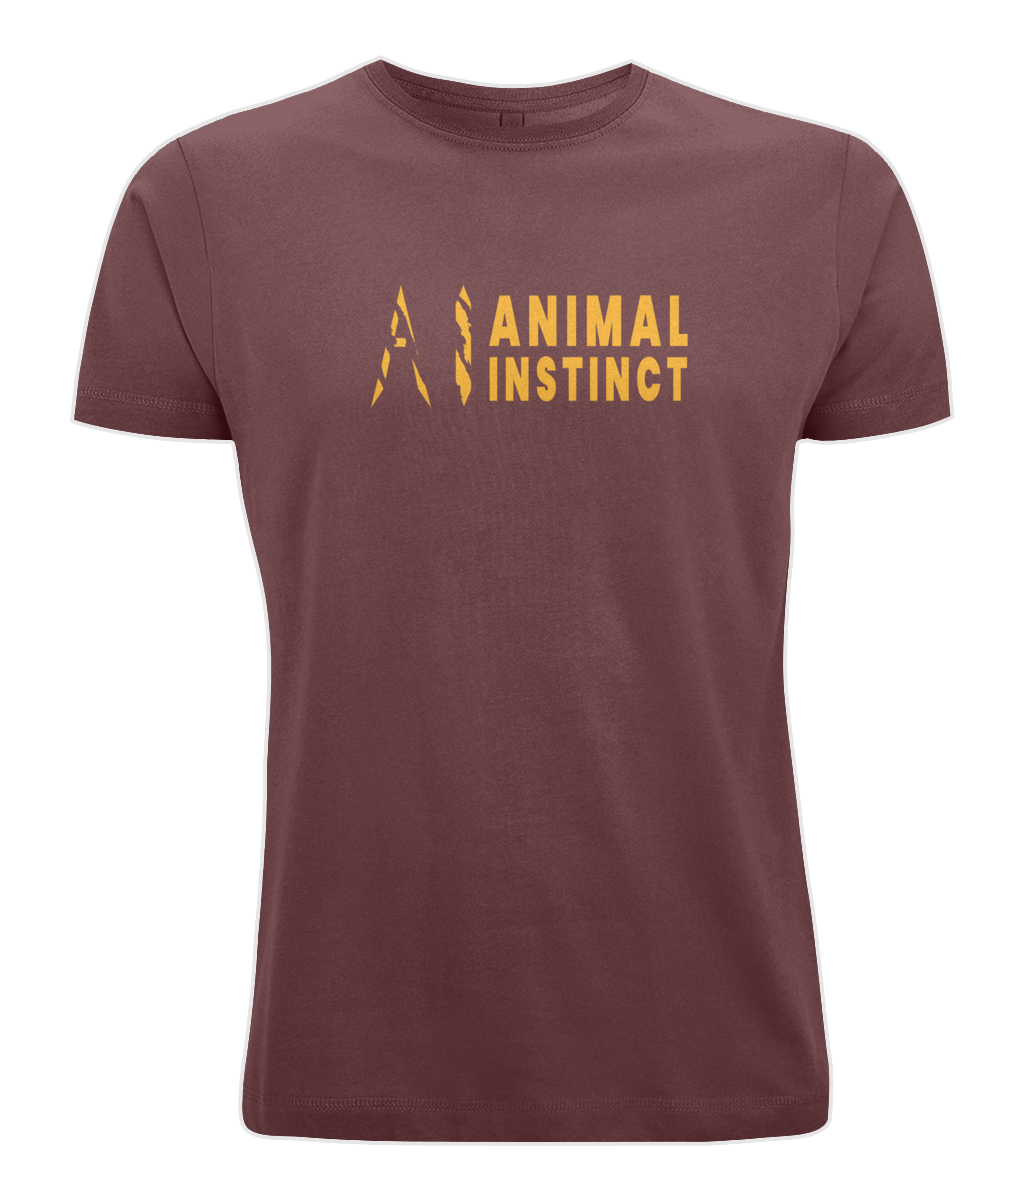 Mens burgundy Graphic Animal Instinct T-Shirt with Premium gold AI logo and Animal Instinct written in premium gold Across the middle of the chest